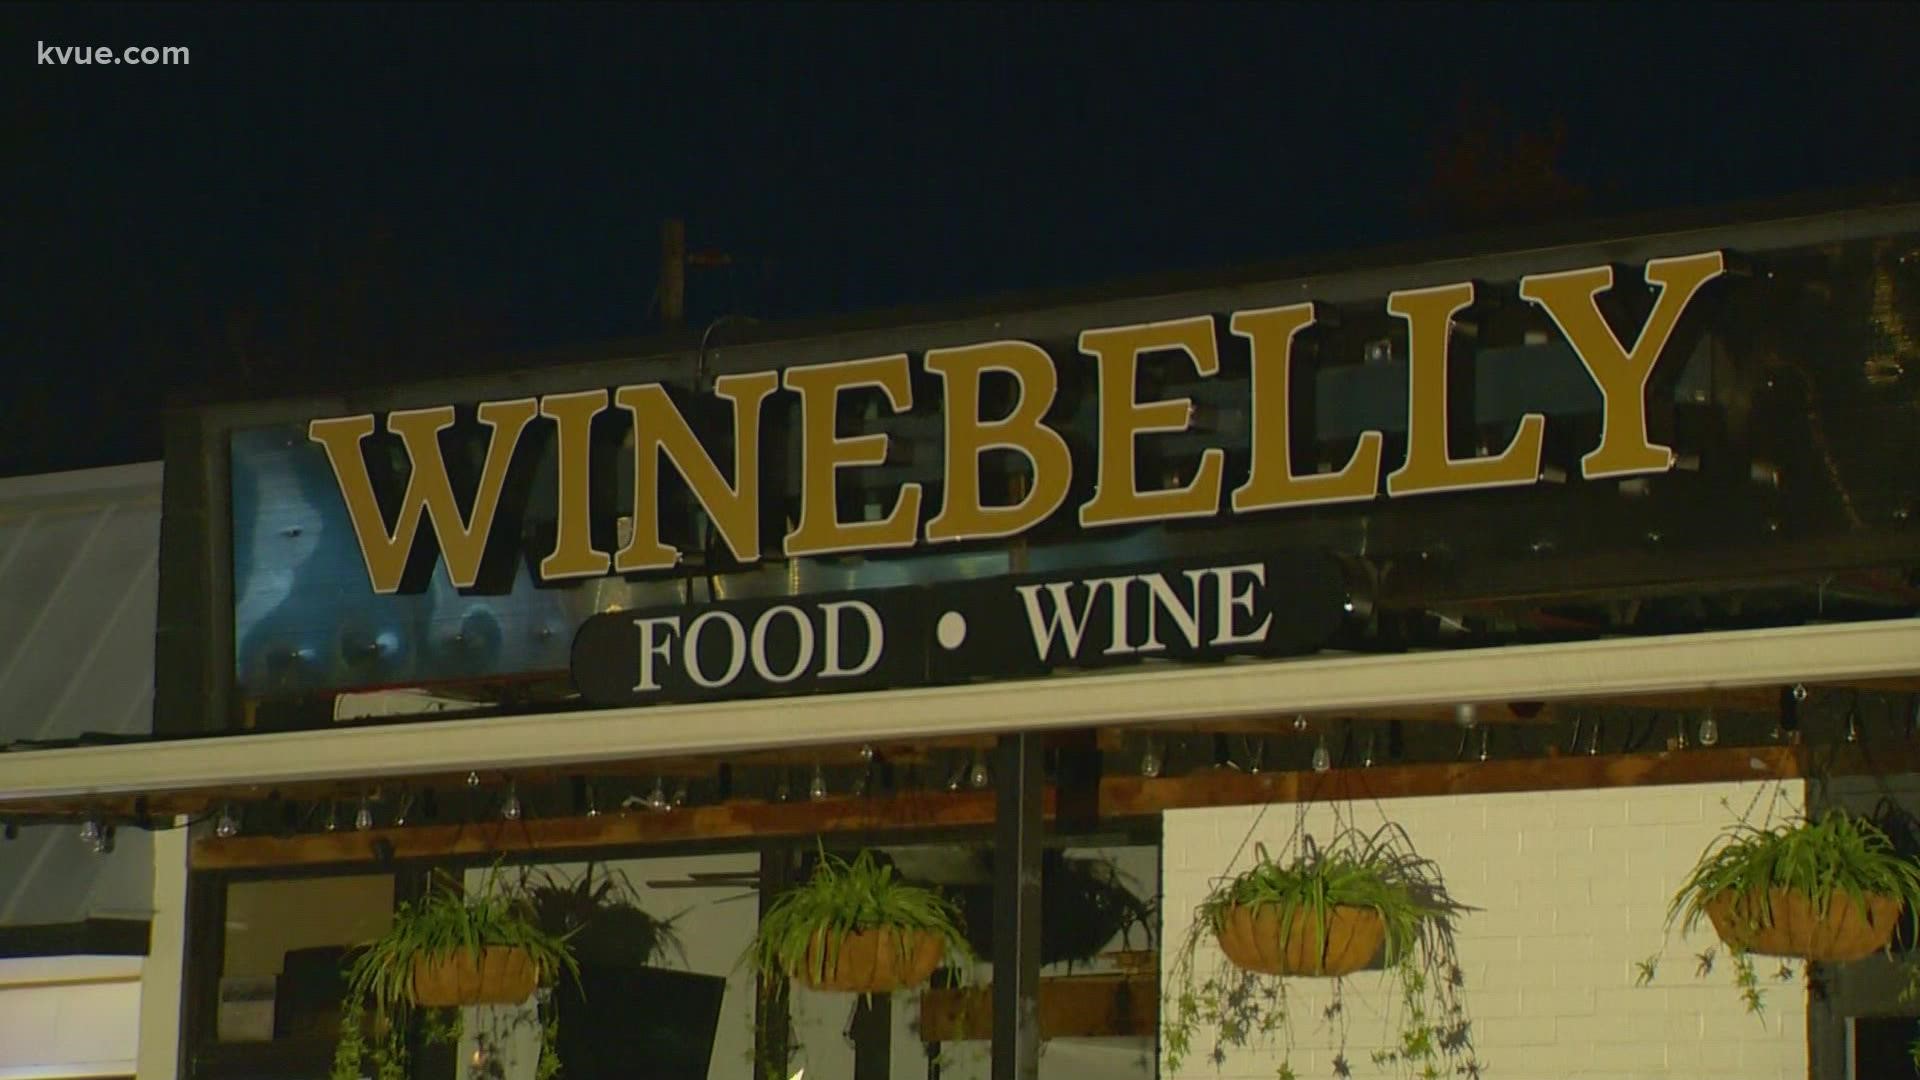 Winebelly, a popular wine bar in South Austin, announced this week that it has closed for good.